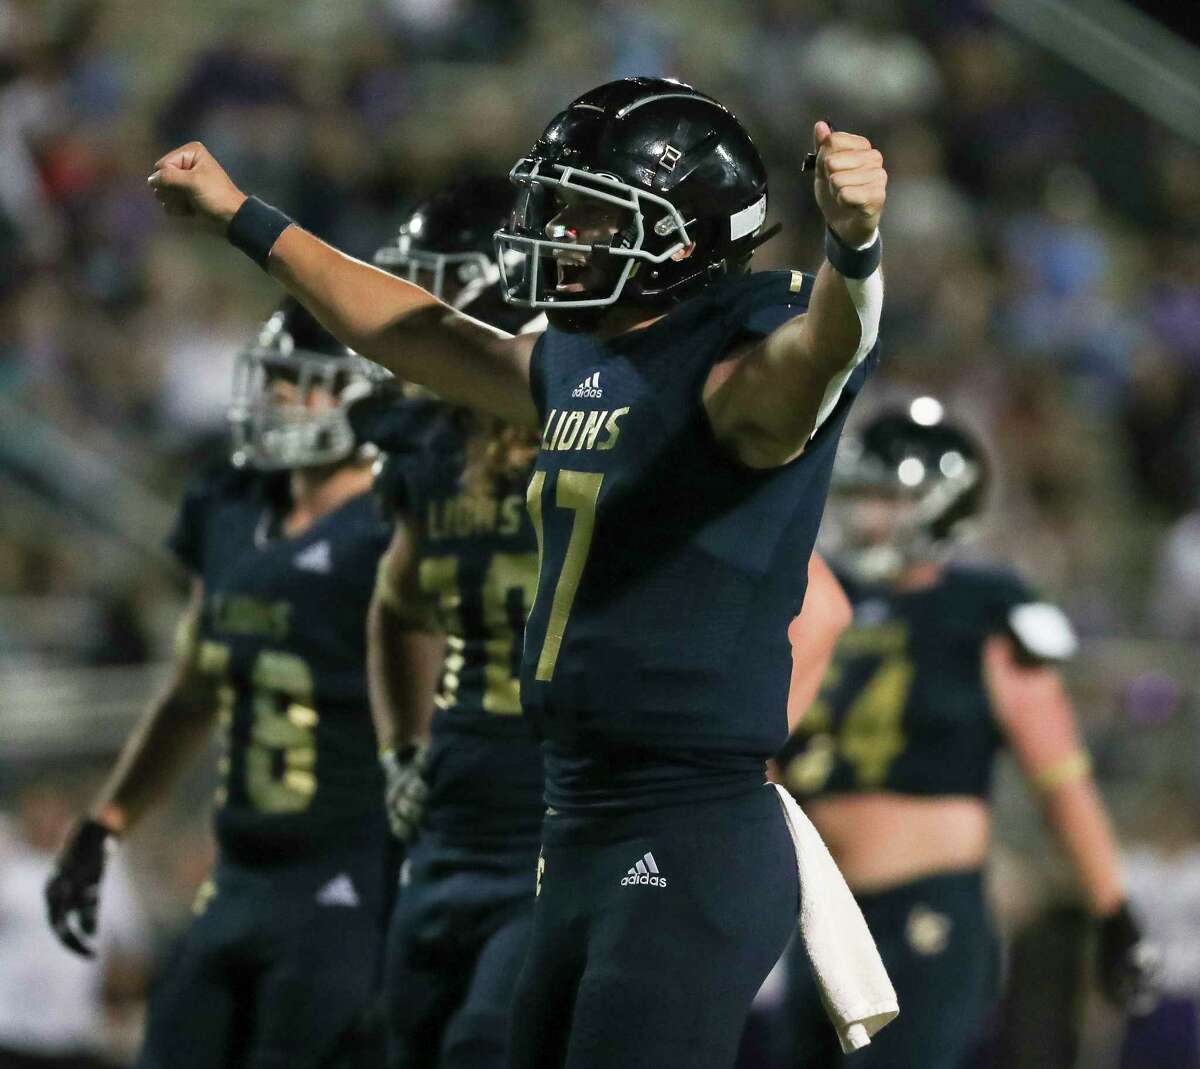 Lake Creek quarterback Cade Tessier (17) celebrates after throwing a 42-yard touchdown pass to wide receiver Sam Lee in the second quarter of a District 10-5A (Div. II) high school football game at Montgomery ISD Stadium, Friday, Sept. 30, 2022, in Montgomery.